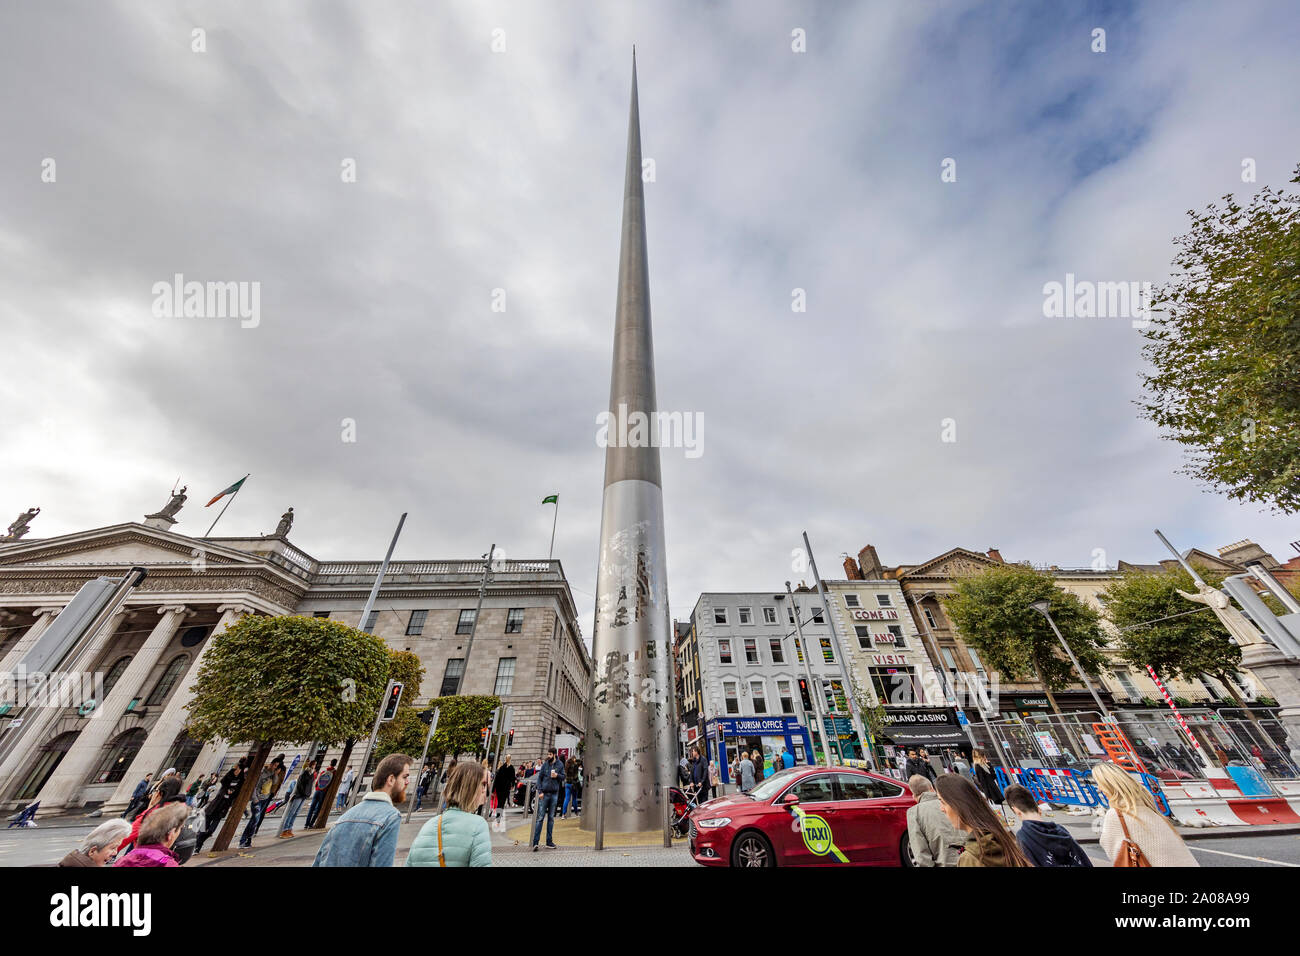 The Spire on O'Connell Street Upper with many shoppers, pedestrians, locals and tourists walking about and shopping in Dublin, Ireland. Stock Photo